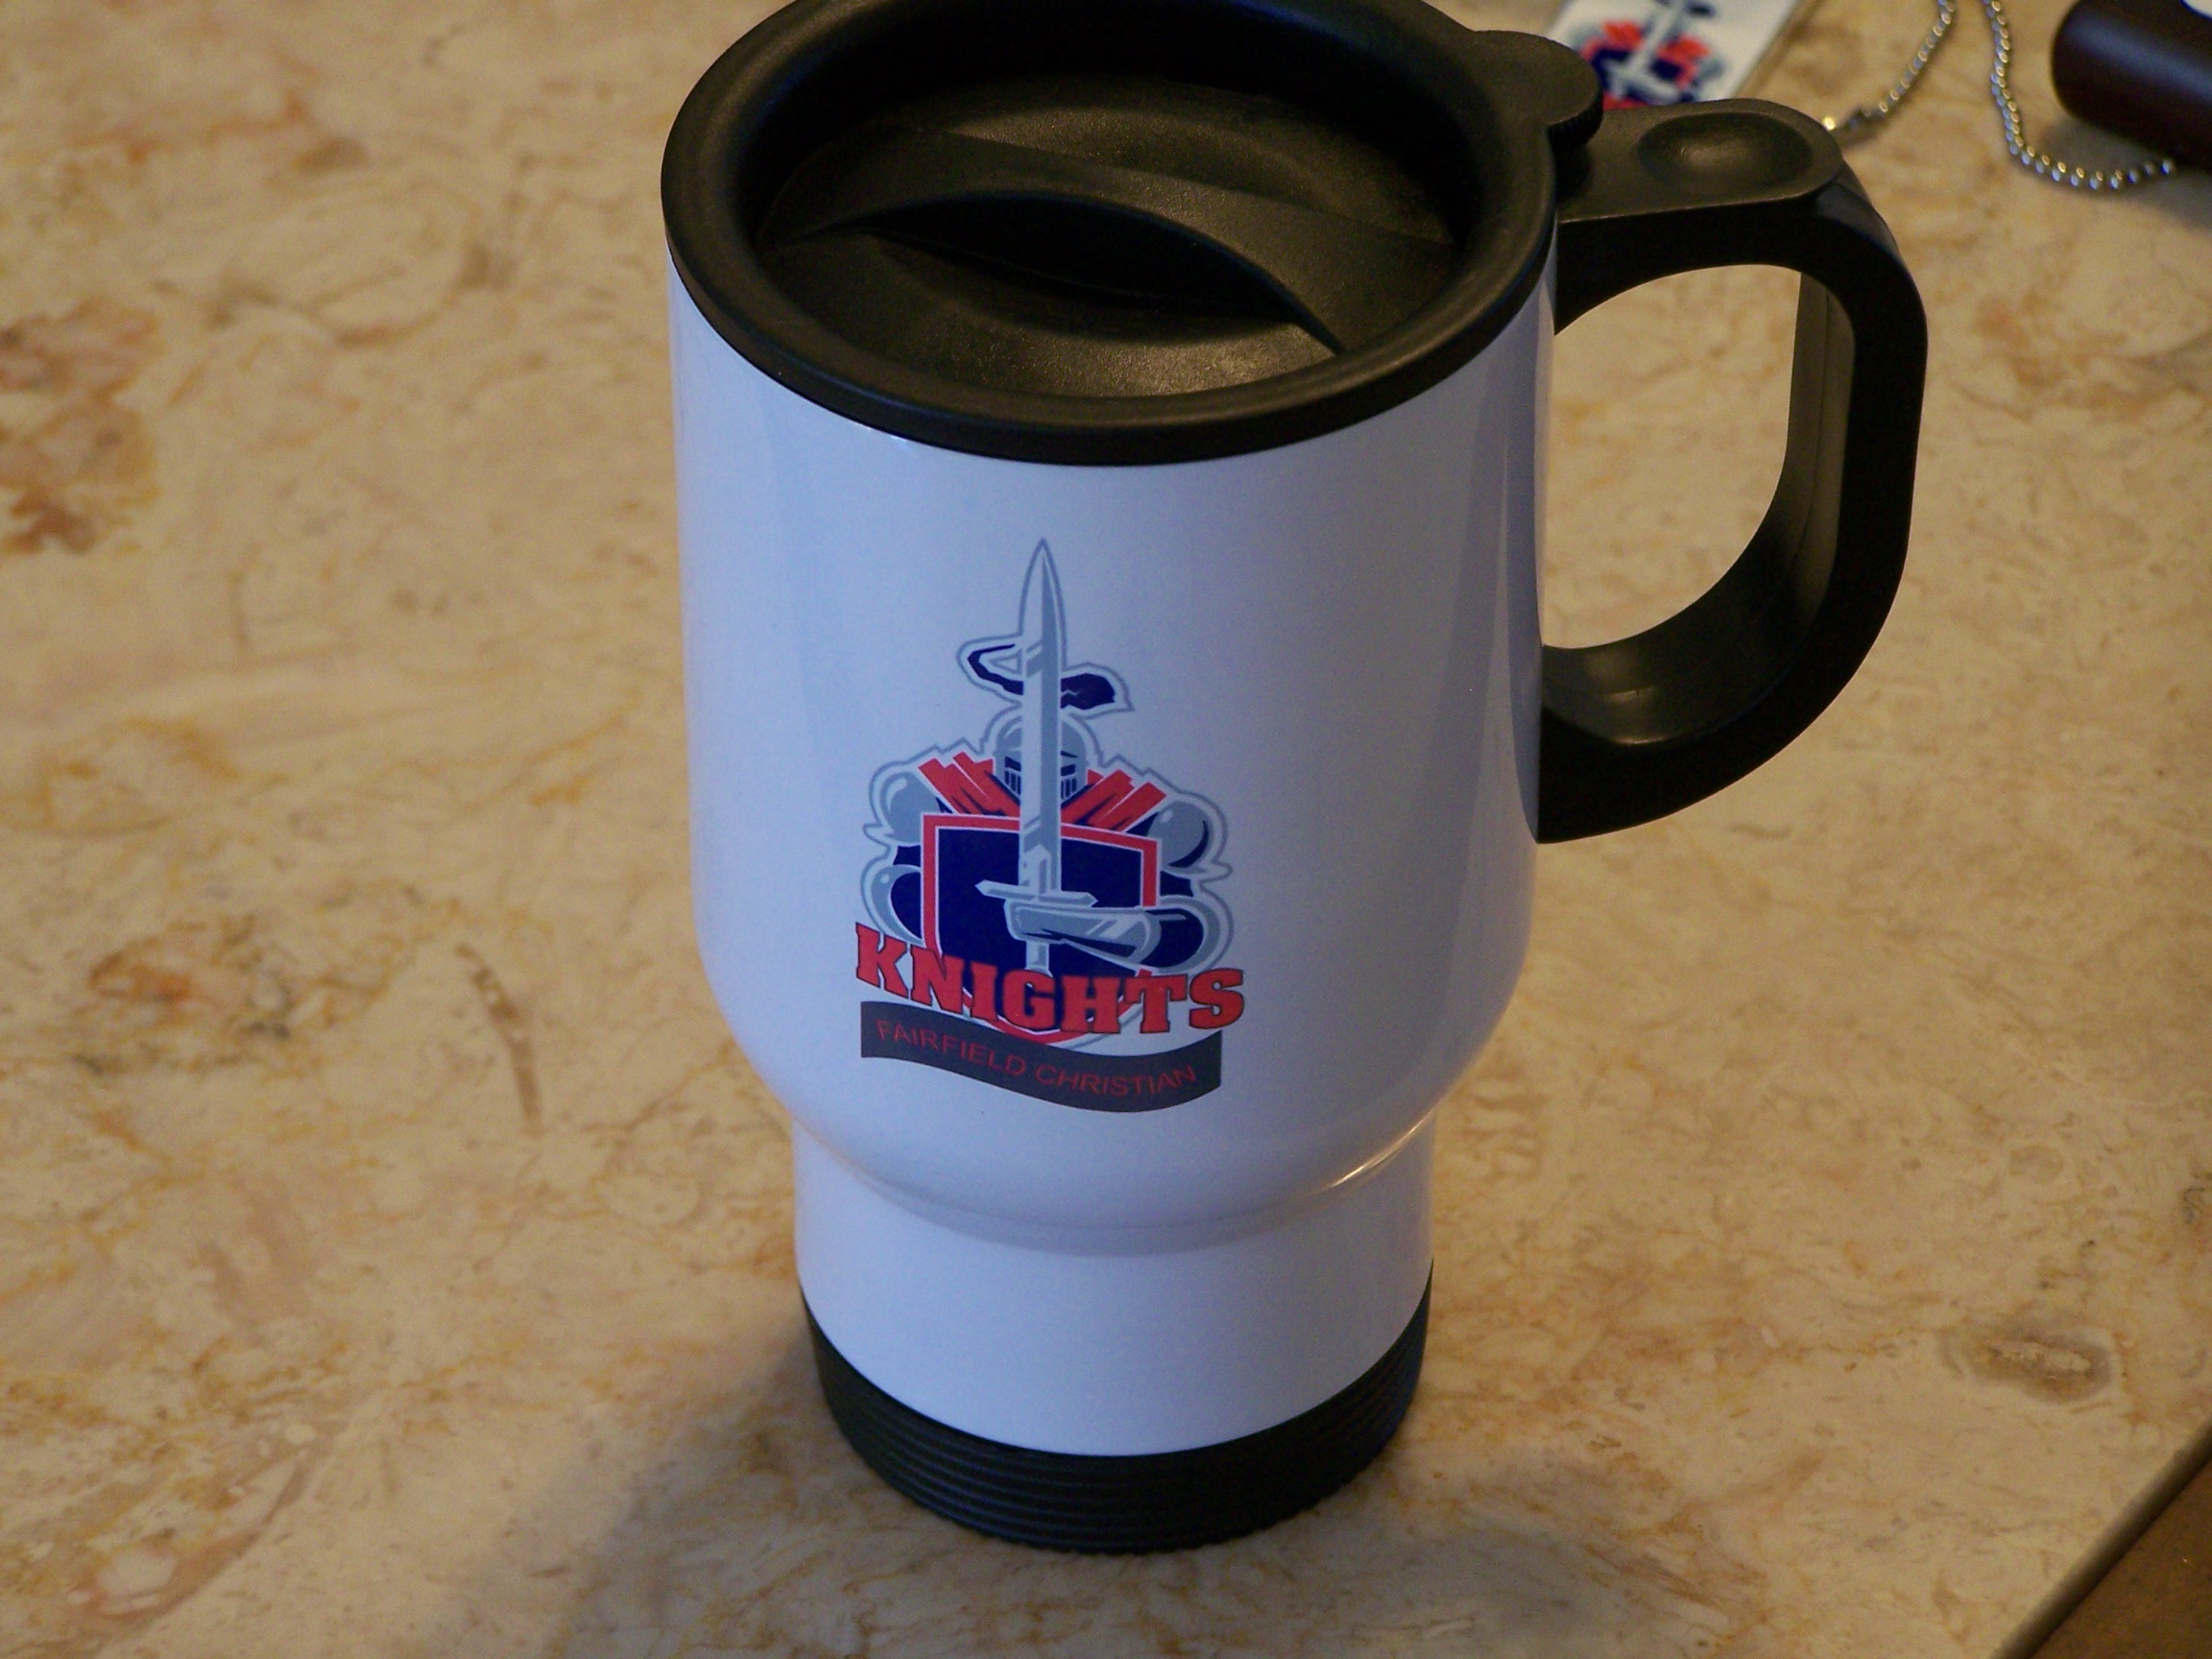 stainless steel mug made with sublimation printing